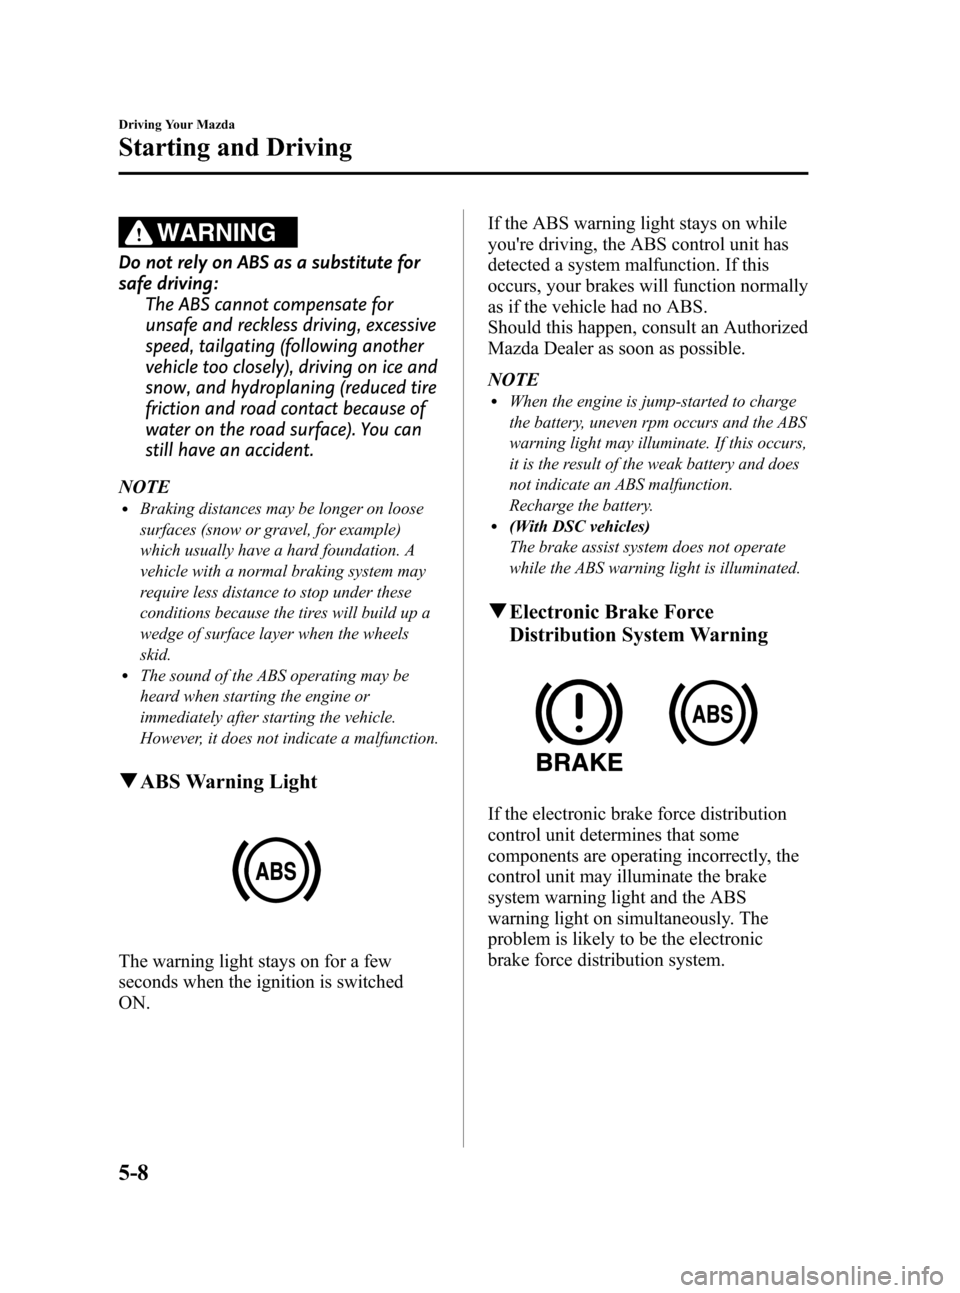 MAZDA MODEL 3 HATCHBACK 2010   (in English) Owners Guide Black plate (164,1)
WARNING
Do not rely on ABS as a substitute for
safe driving:
The ABS cannot compensate for
unsafe and reckless driving, excessive
speed, tailgating (following another
vehicle too c